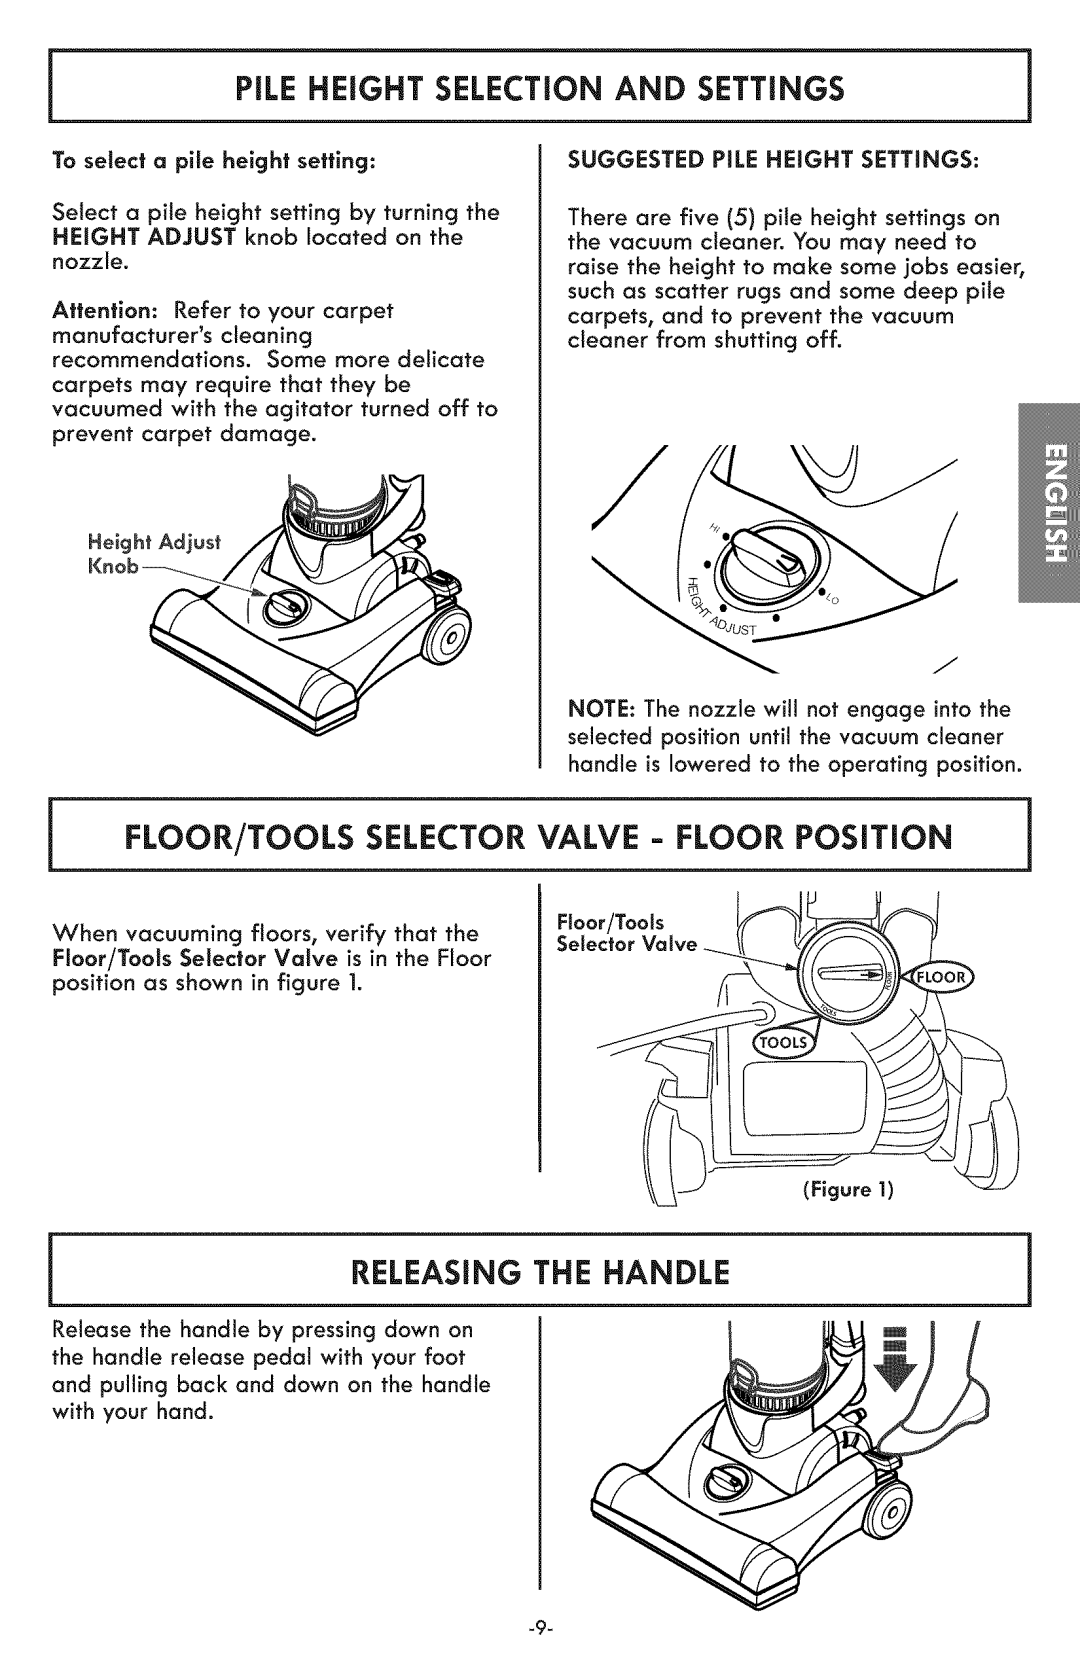 Kenmore 116.31591 PiLE HEIGHT SELECTION AND SETTINGS, FLOOR/TOOLS SELECTOR VALVE - FLOOR POSiTiON, Releasing The Handle 